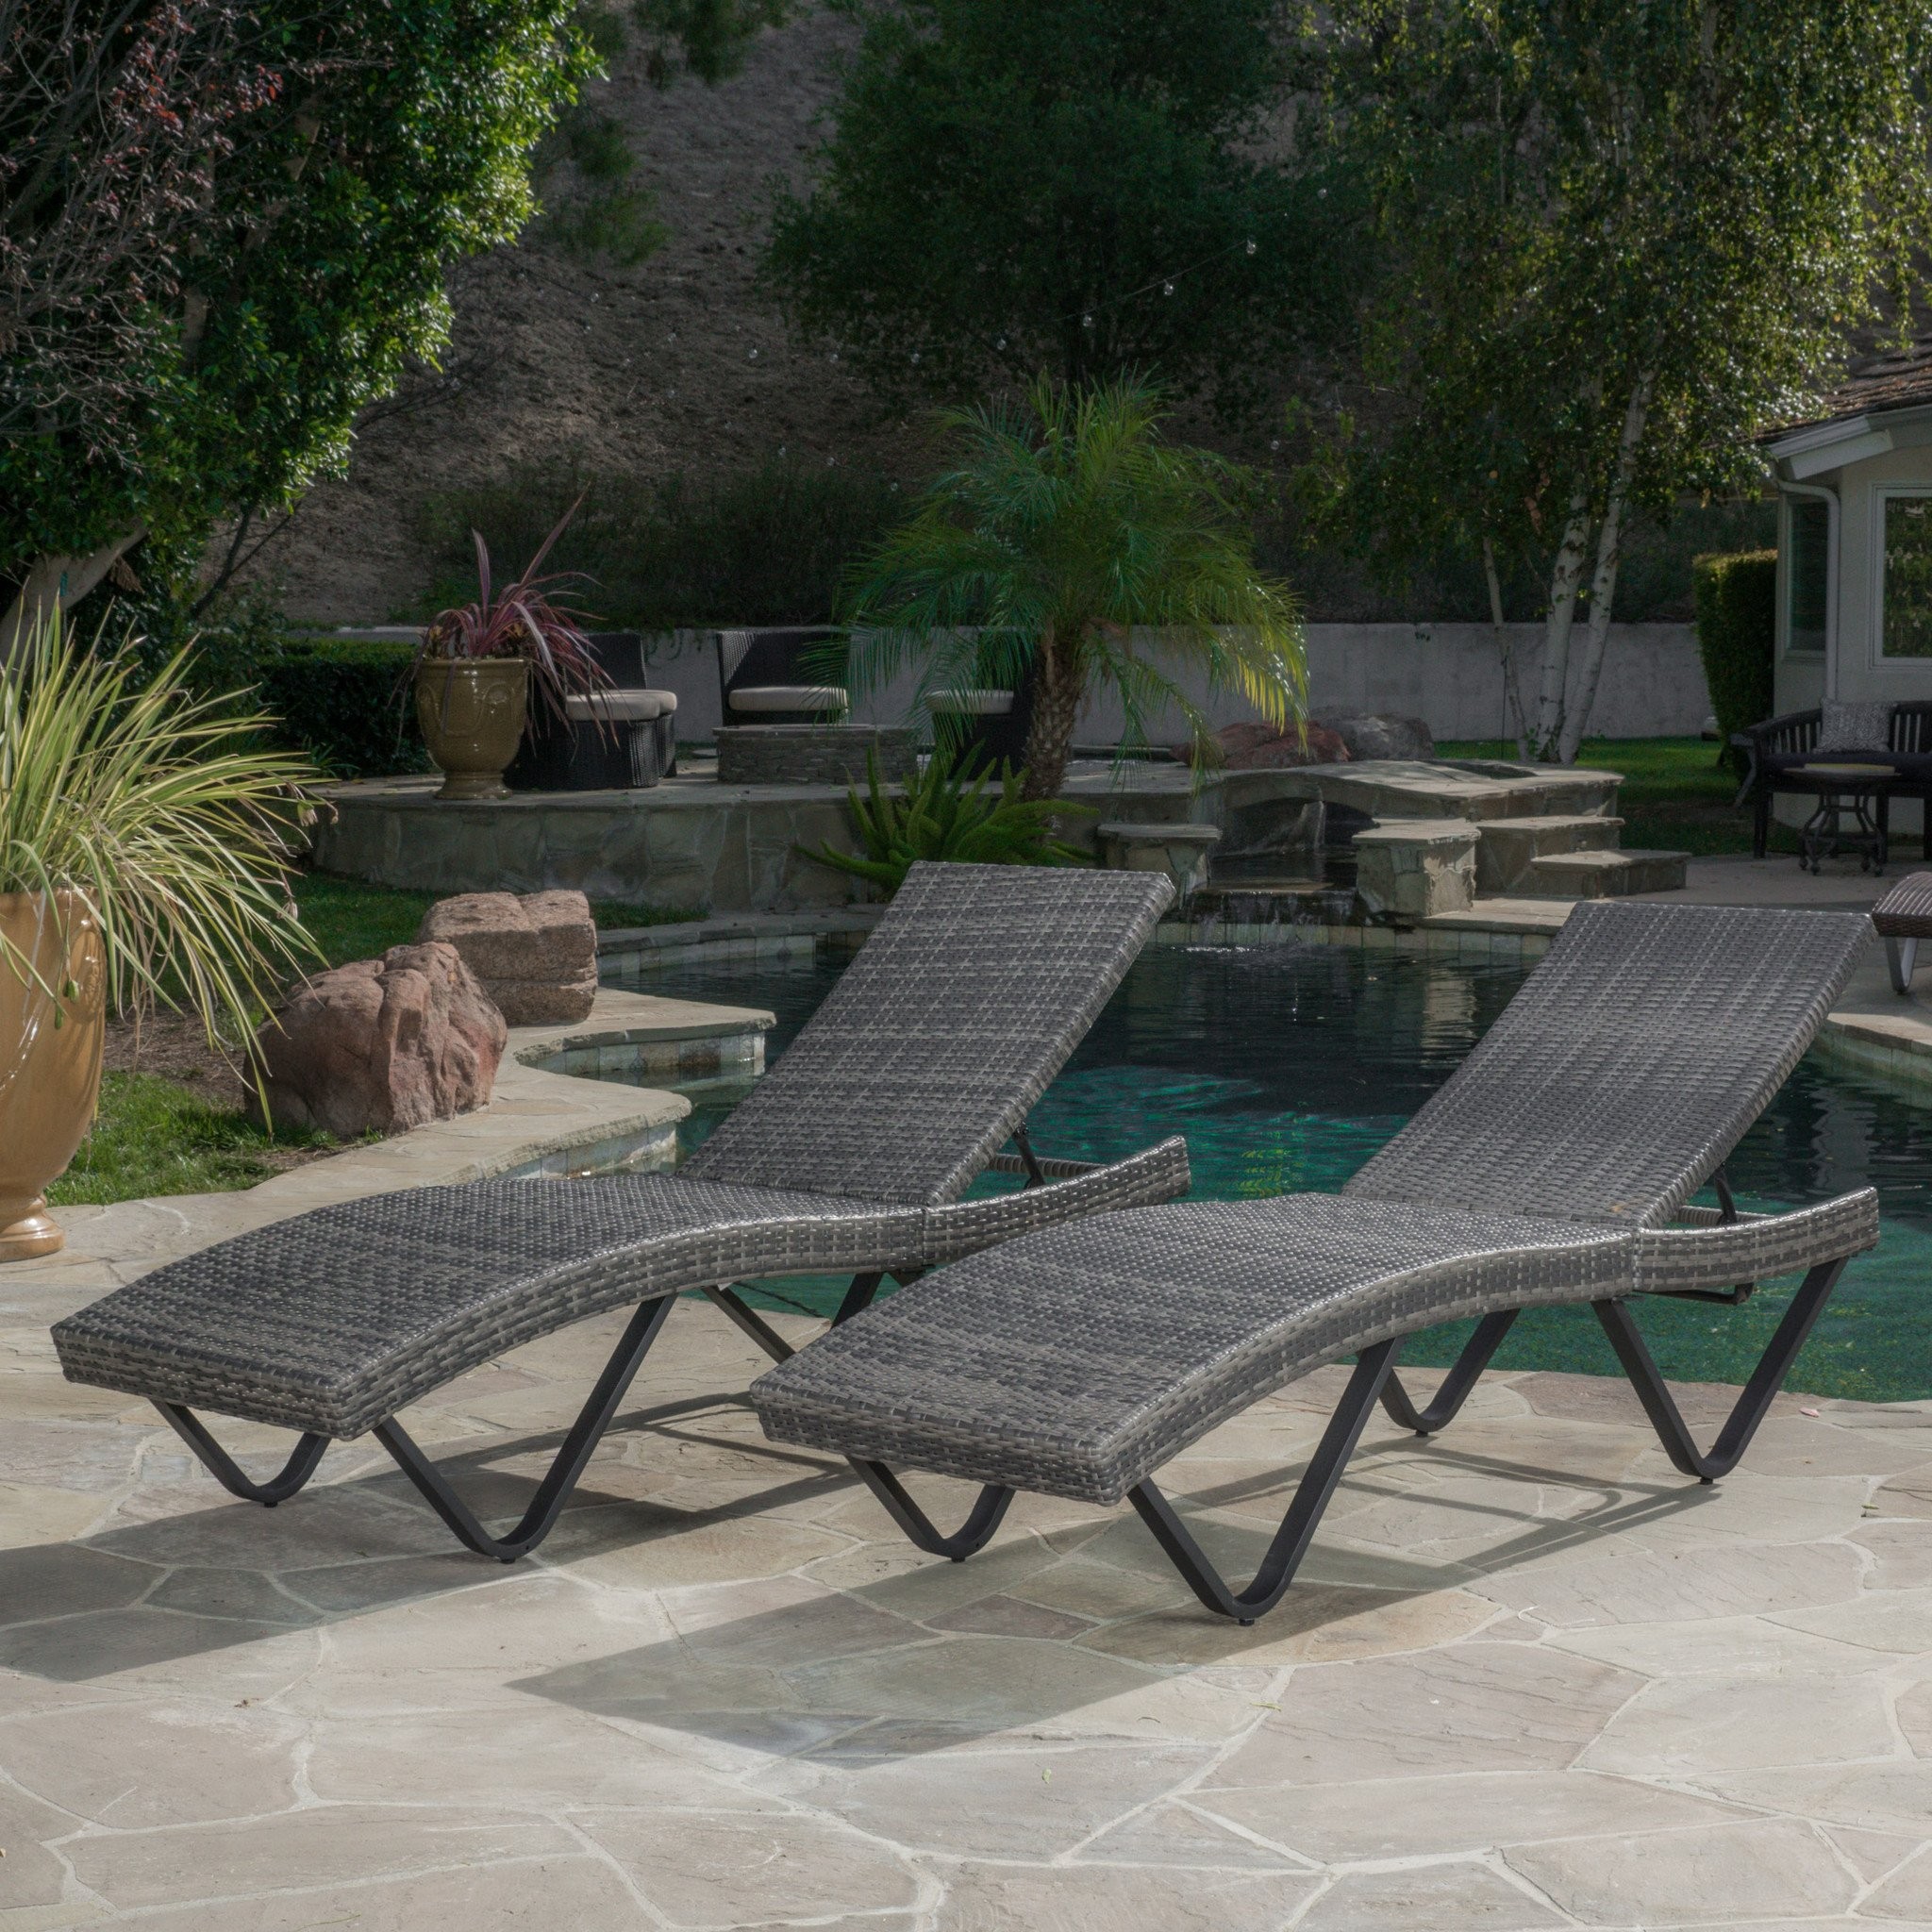 Zanna Outdoor Wicker Chaise Lounge Set of Two